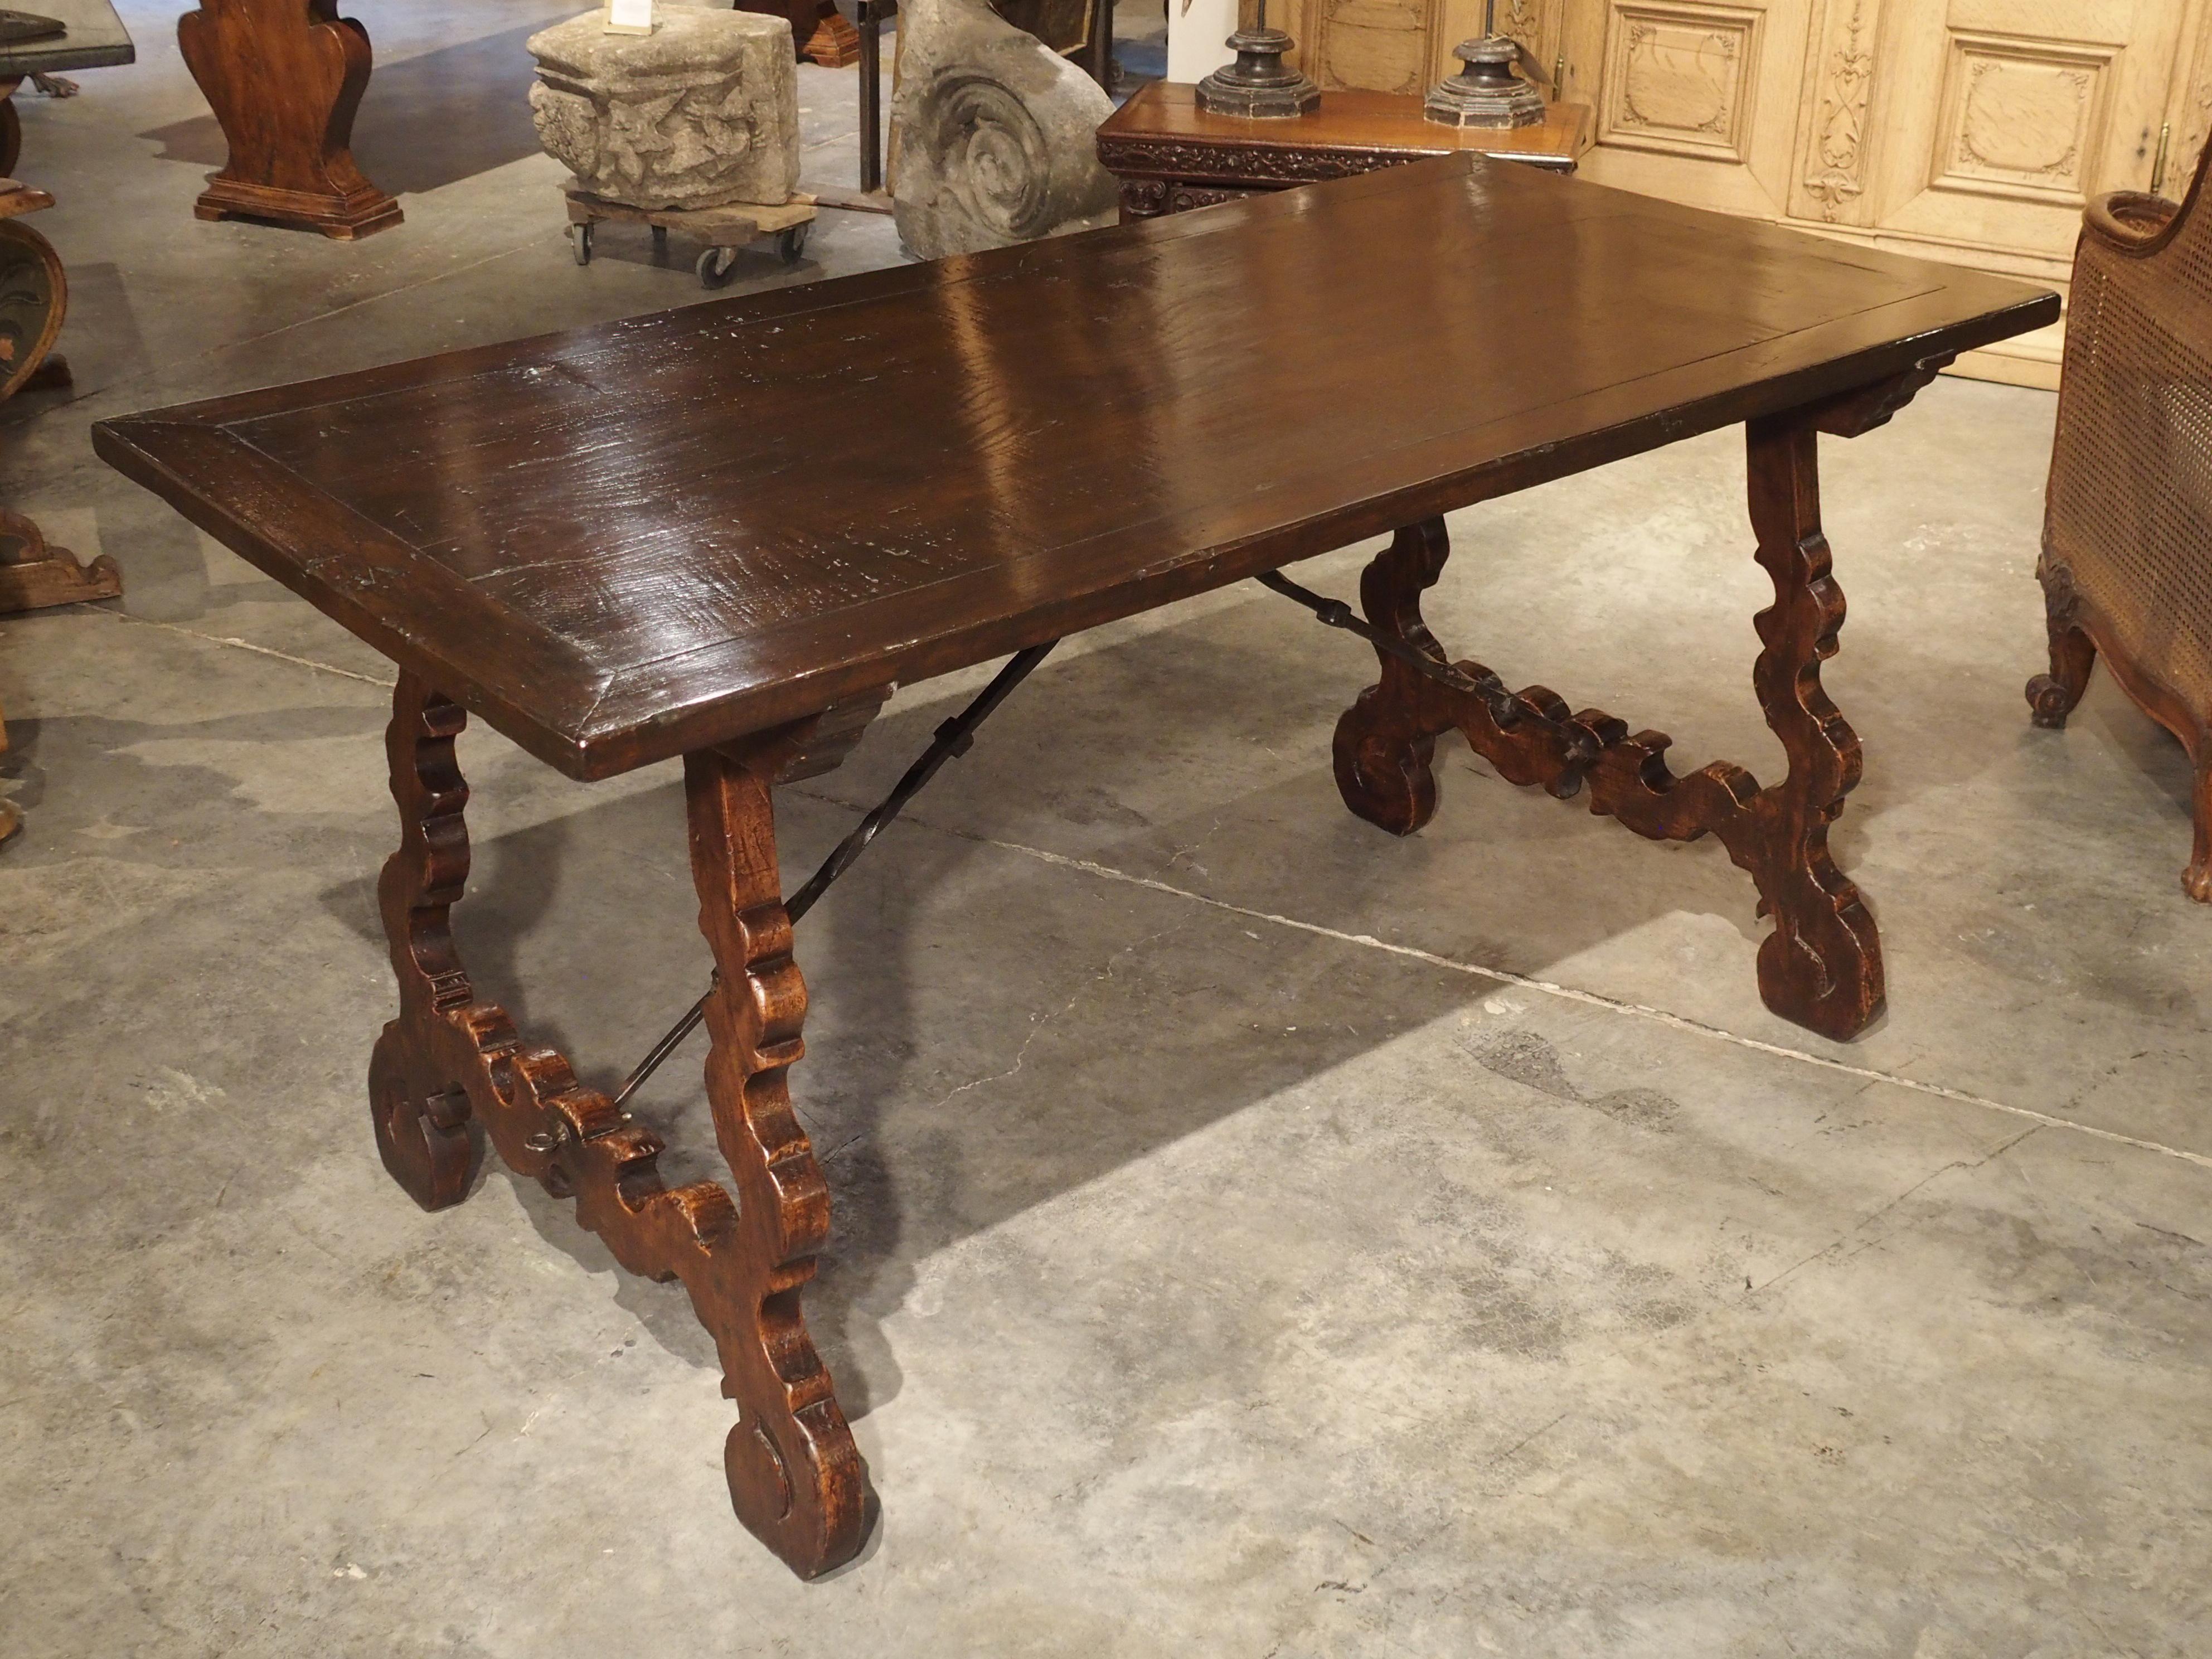 Spanish Carved Catalan Table with Lyre Legs and Wrought Iron Supports